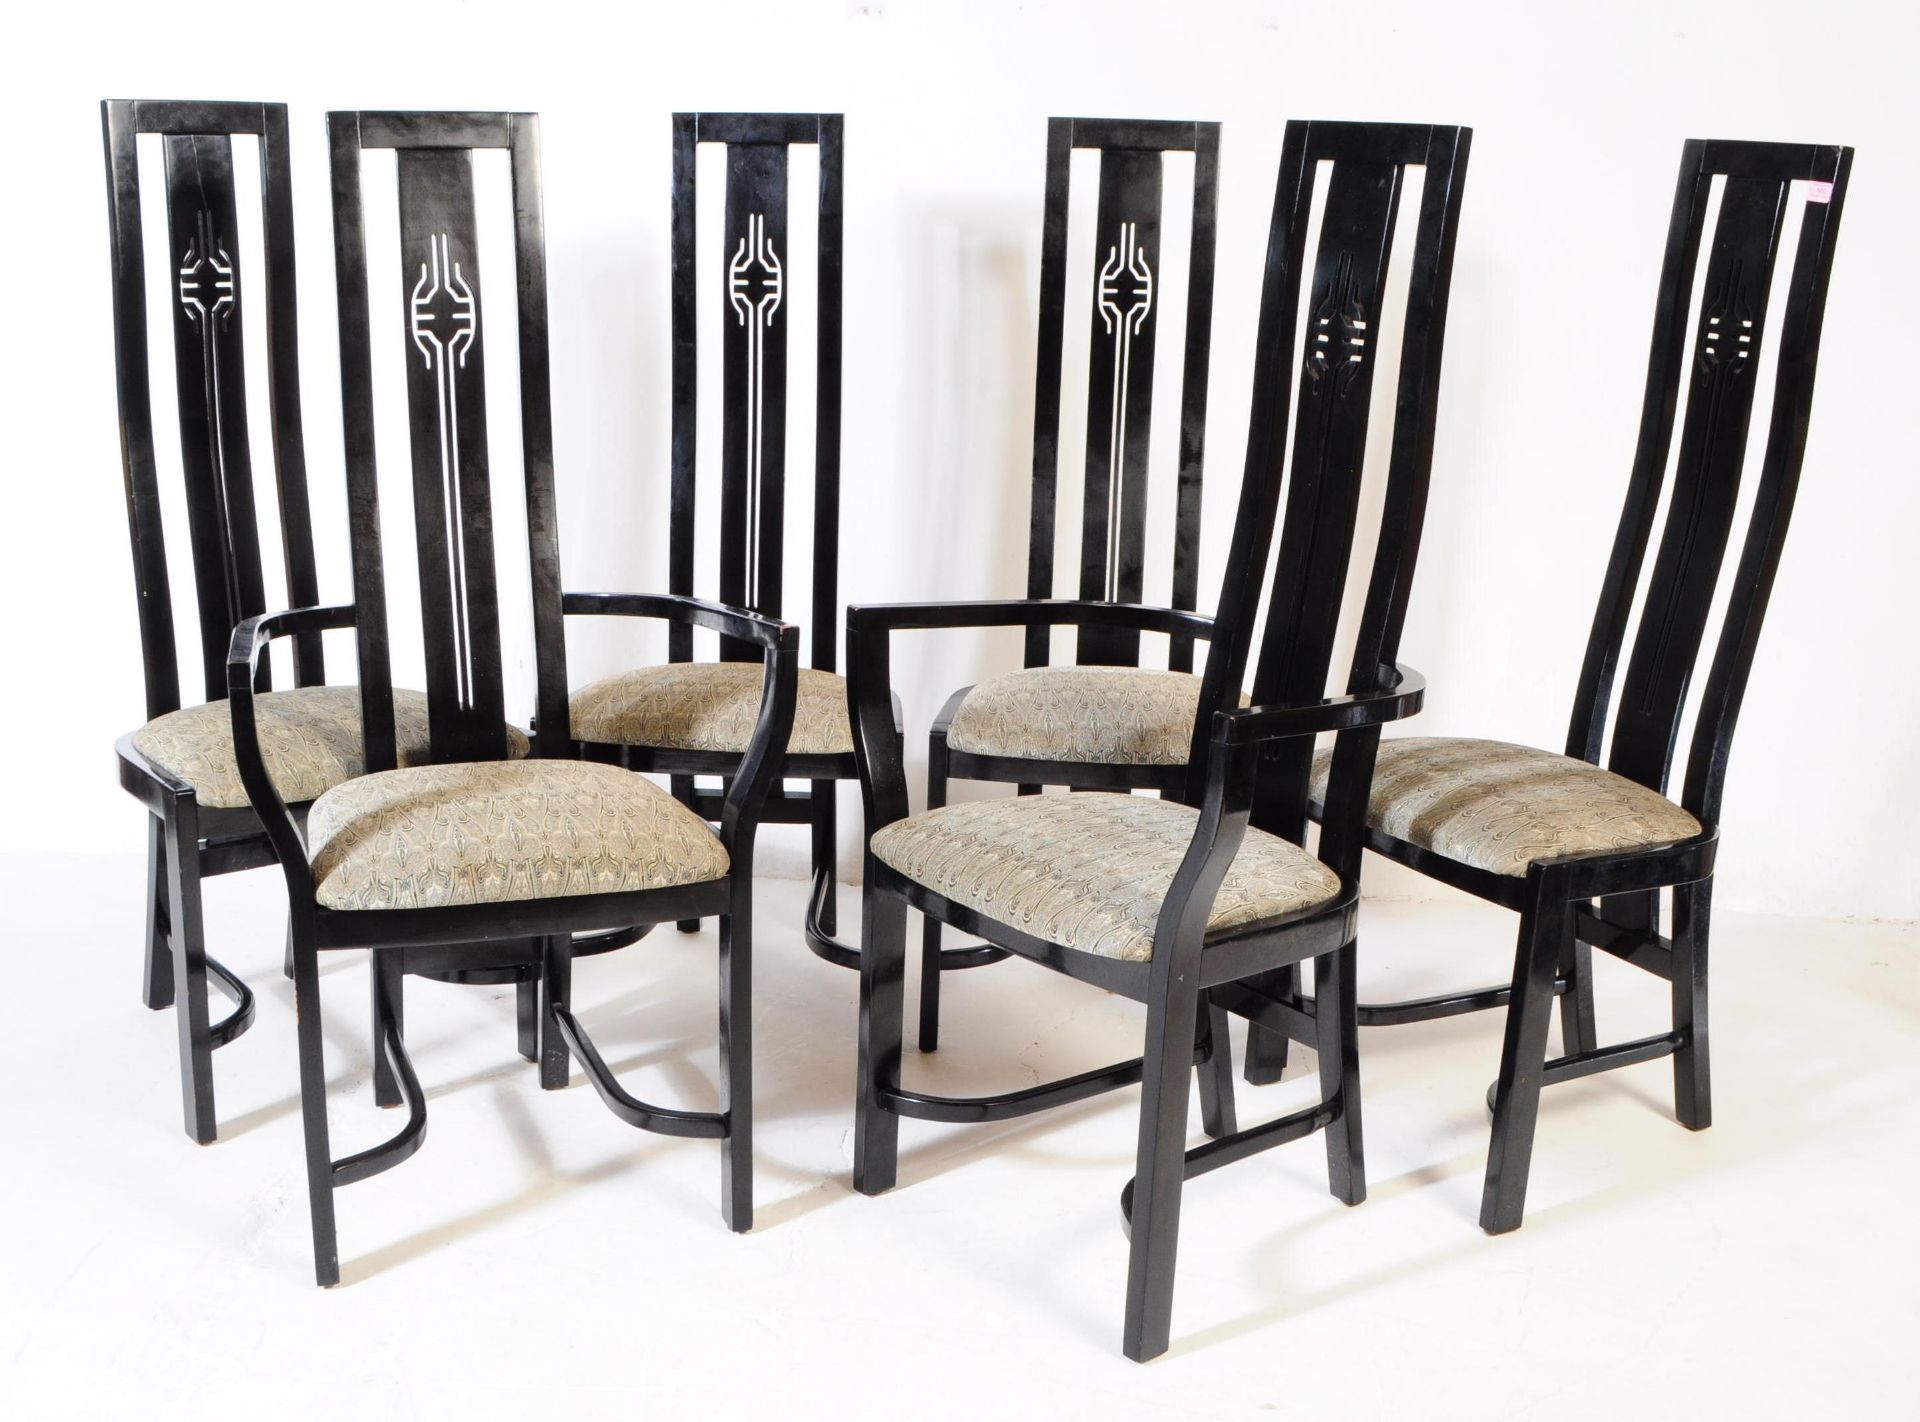 KESTERPORT - SIX CONTEMPORARY CHINESE INFLUENCE CHAIRS